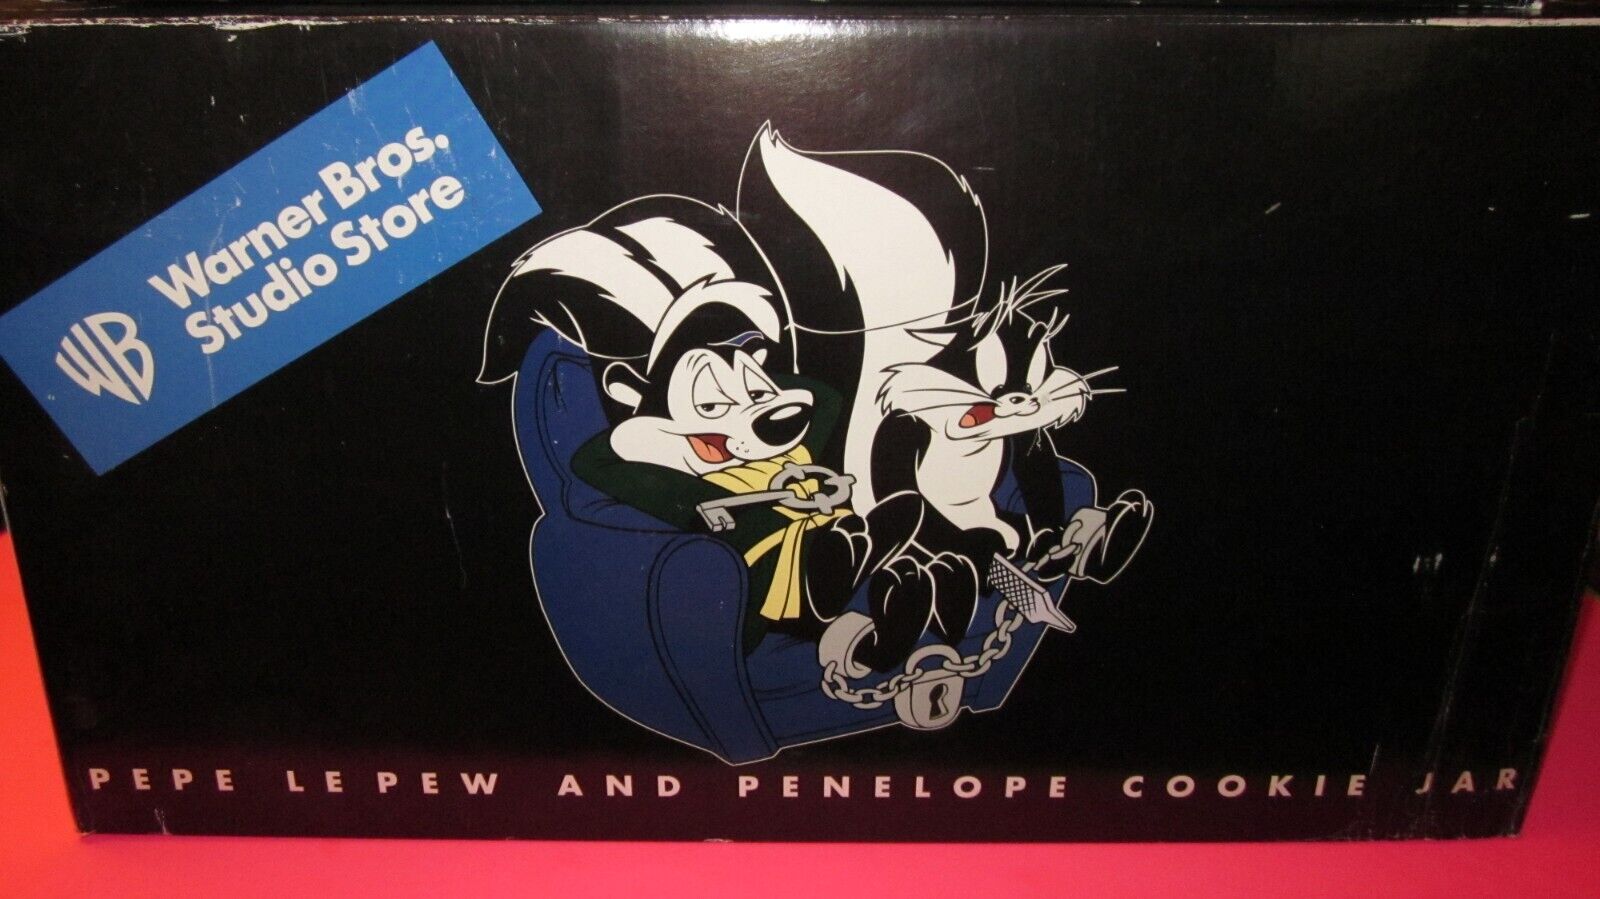 Warner Bros Looney Tunes Pepe Le Pew and Penelope Lock and Key Couch Cookie Jar